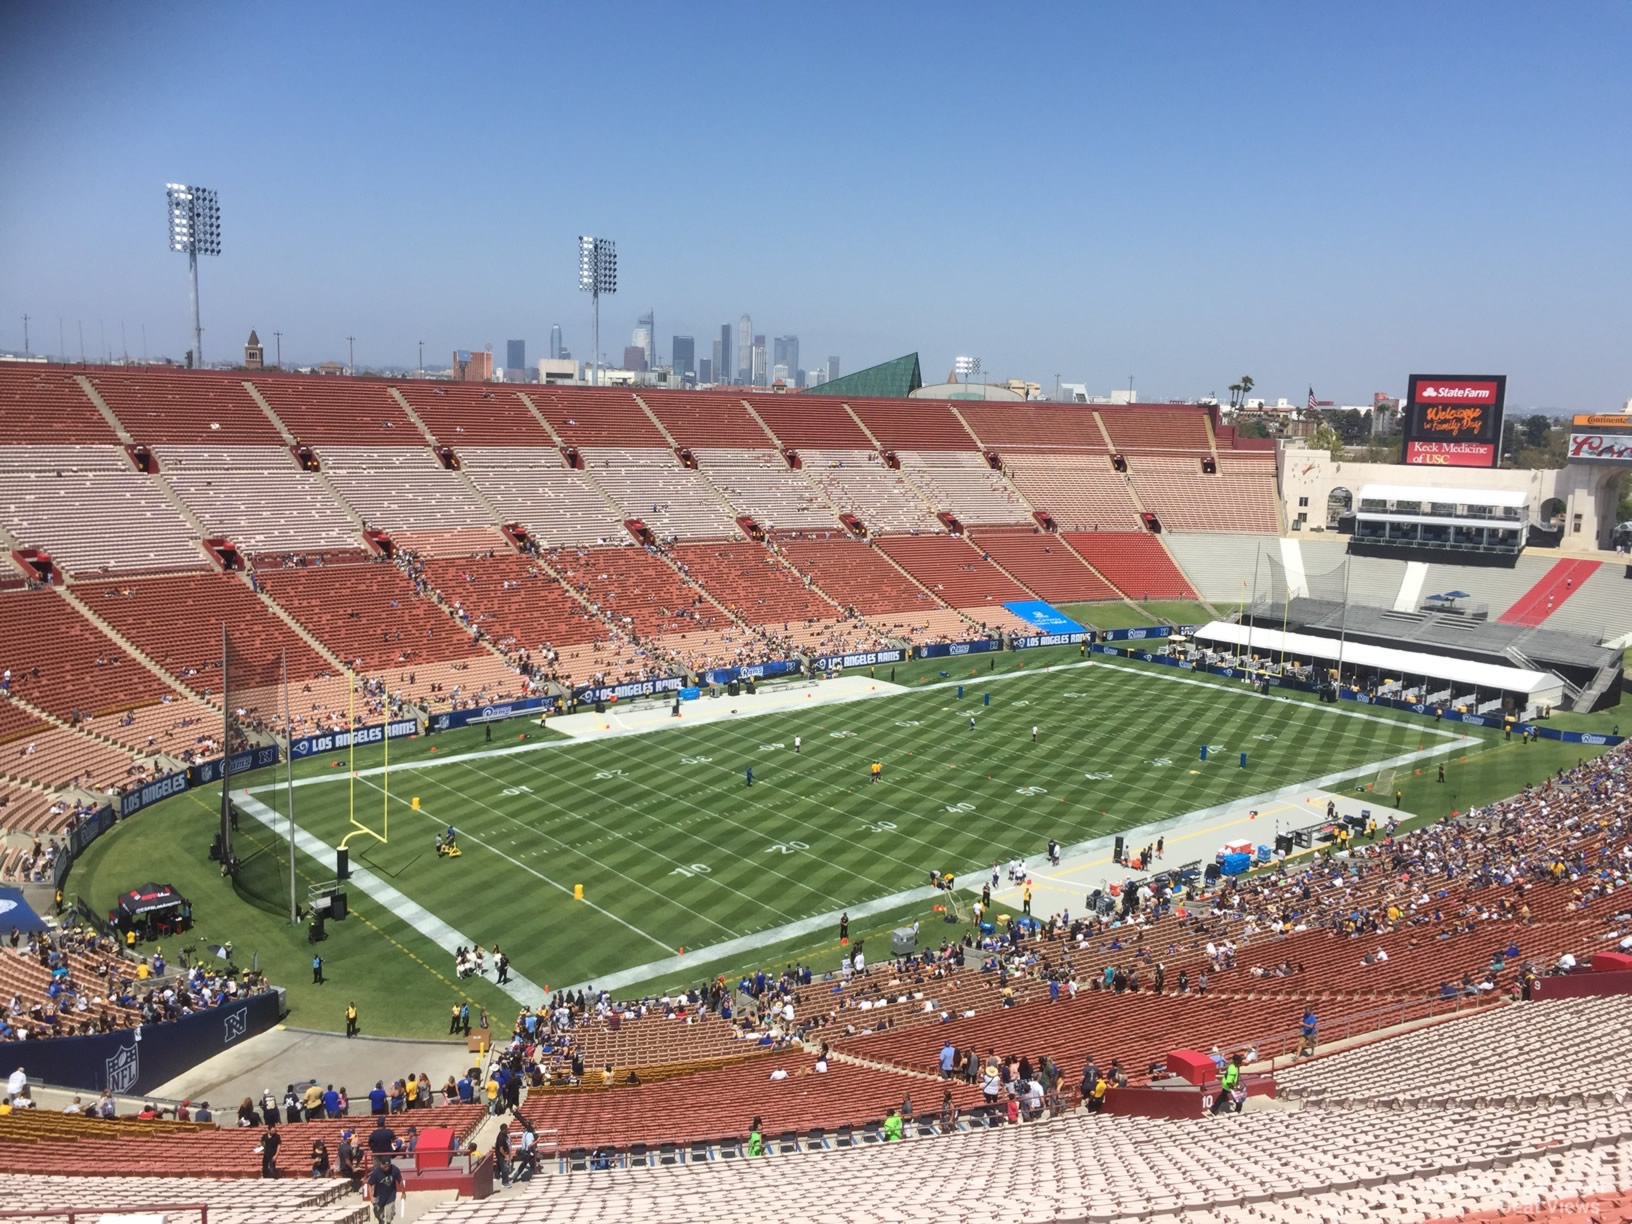 section 310, row 22 seat view  - los angeles memorial coliseum